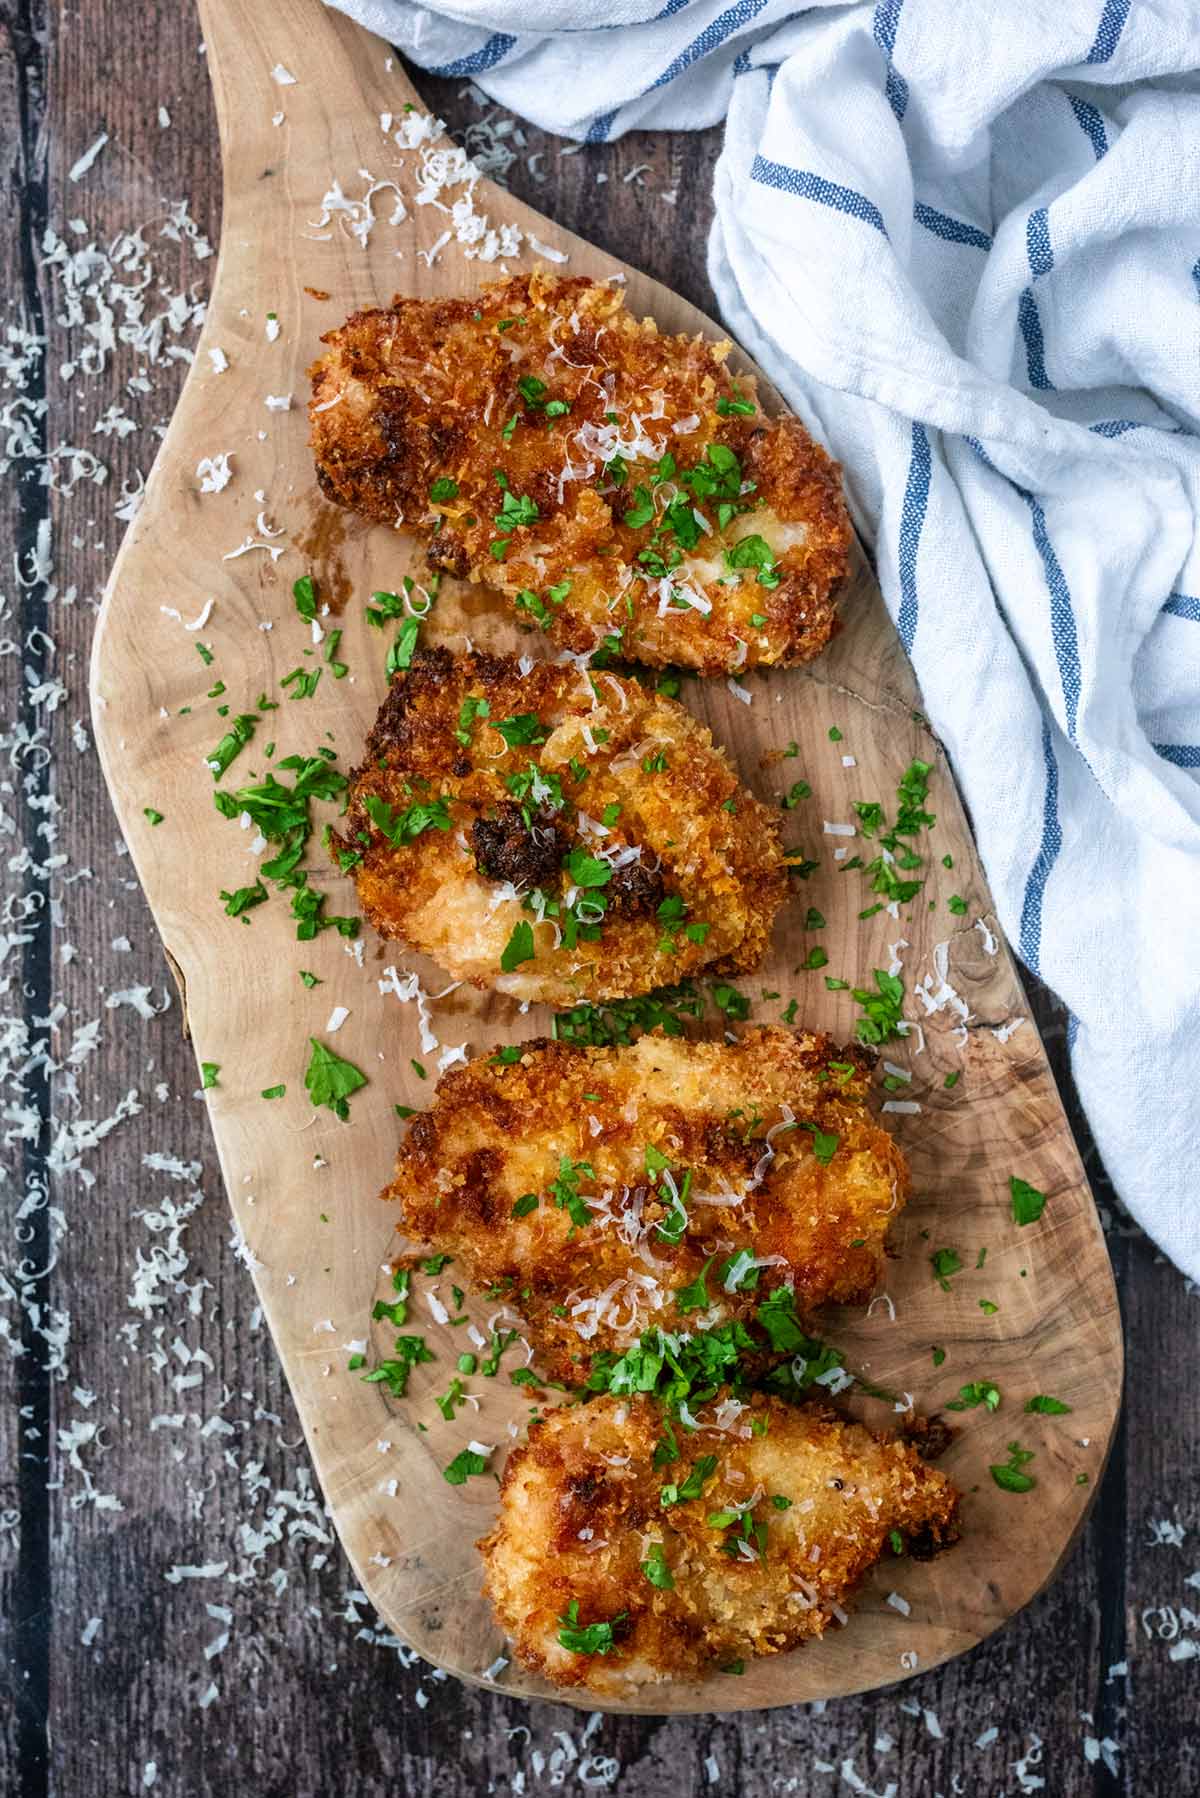 Four breaded chicken breasts on a wooden serving board.